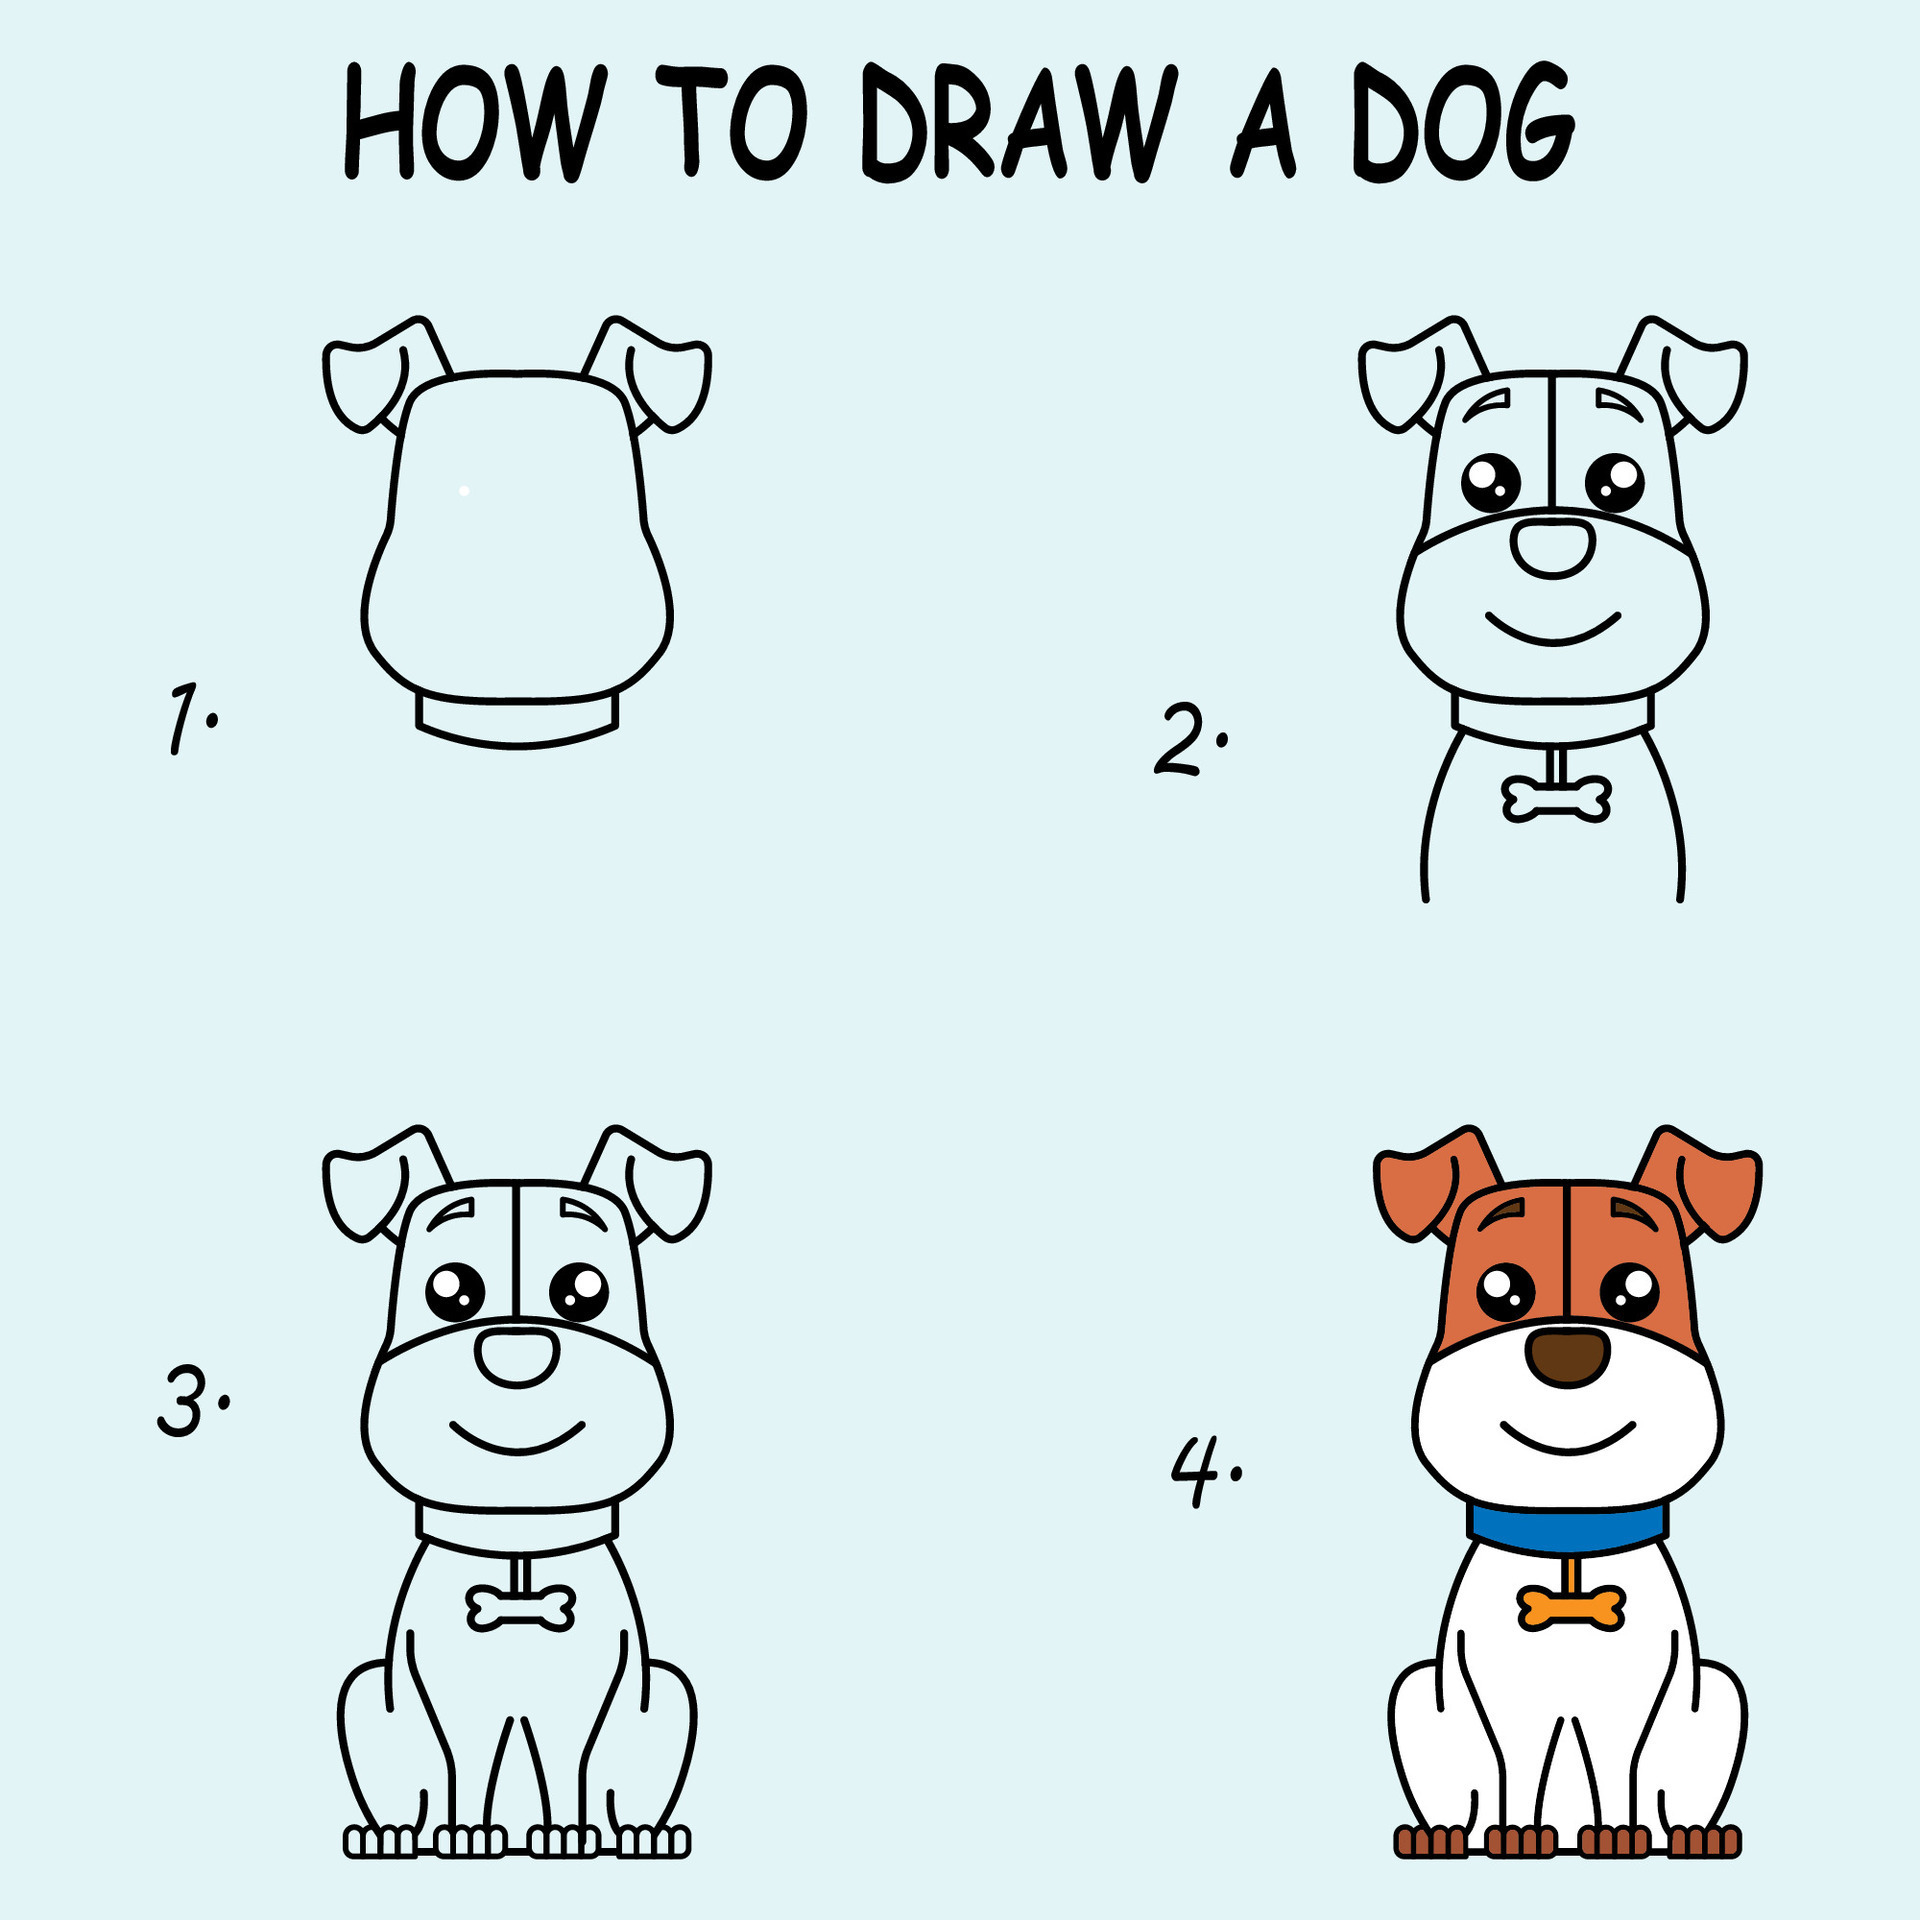 https://static.vecteezy.com/system/resources/previews/027/916/972/original/step-by-step-to-draw-a-dog-drawing-tutorial-a-dog-drawing-lesson-for-children-illustration-free-vector.jpg